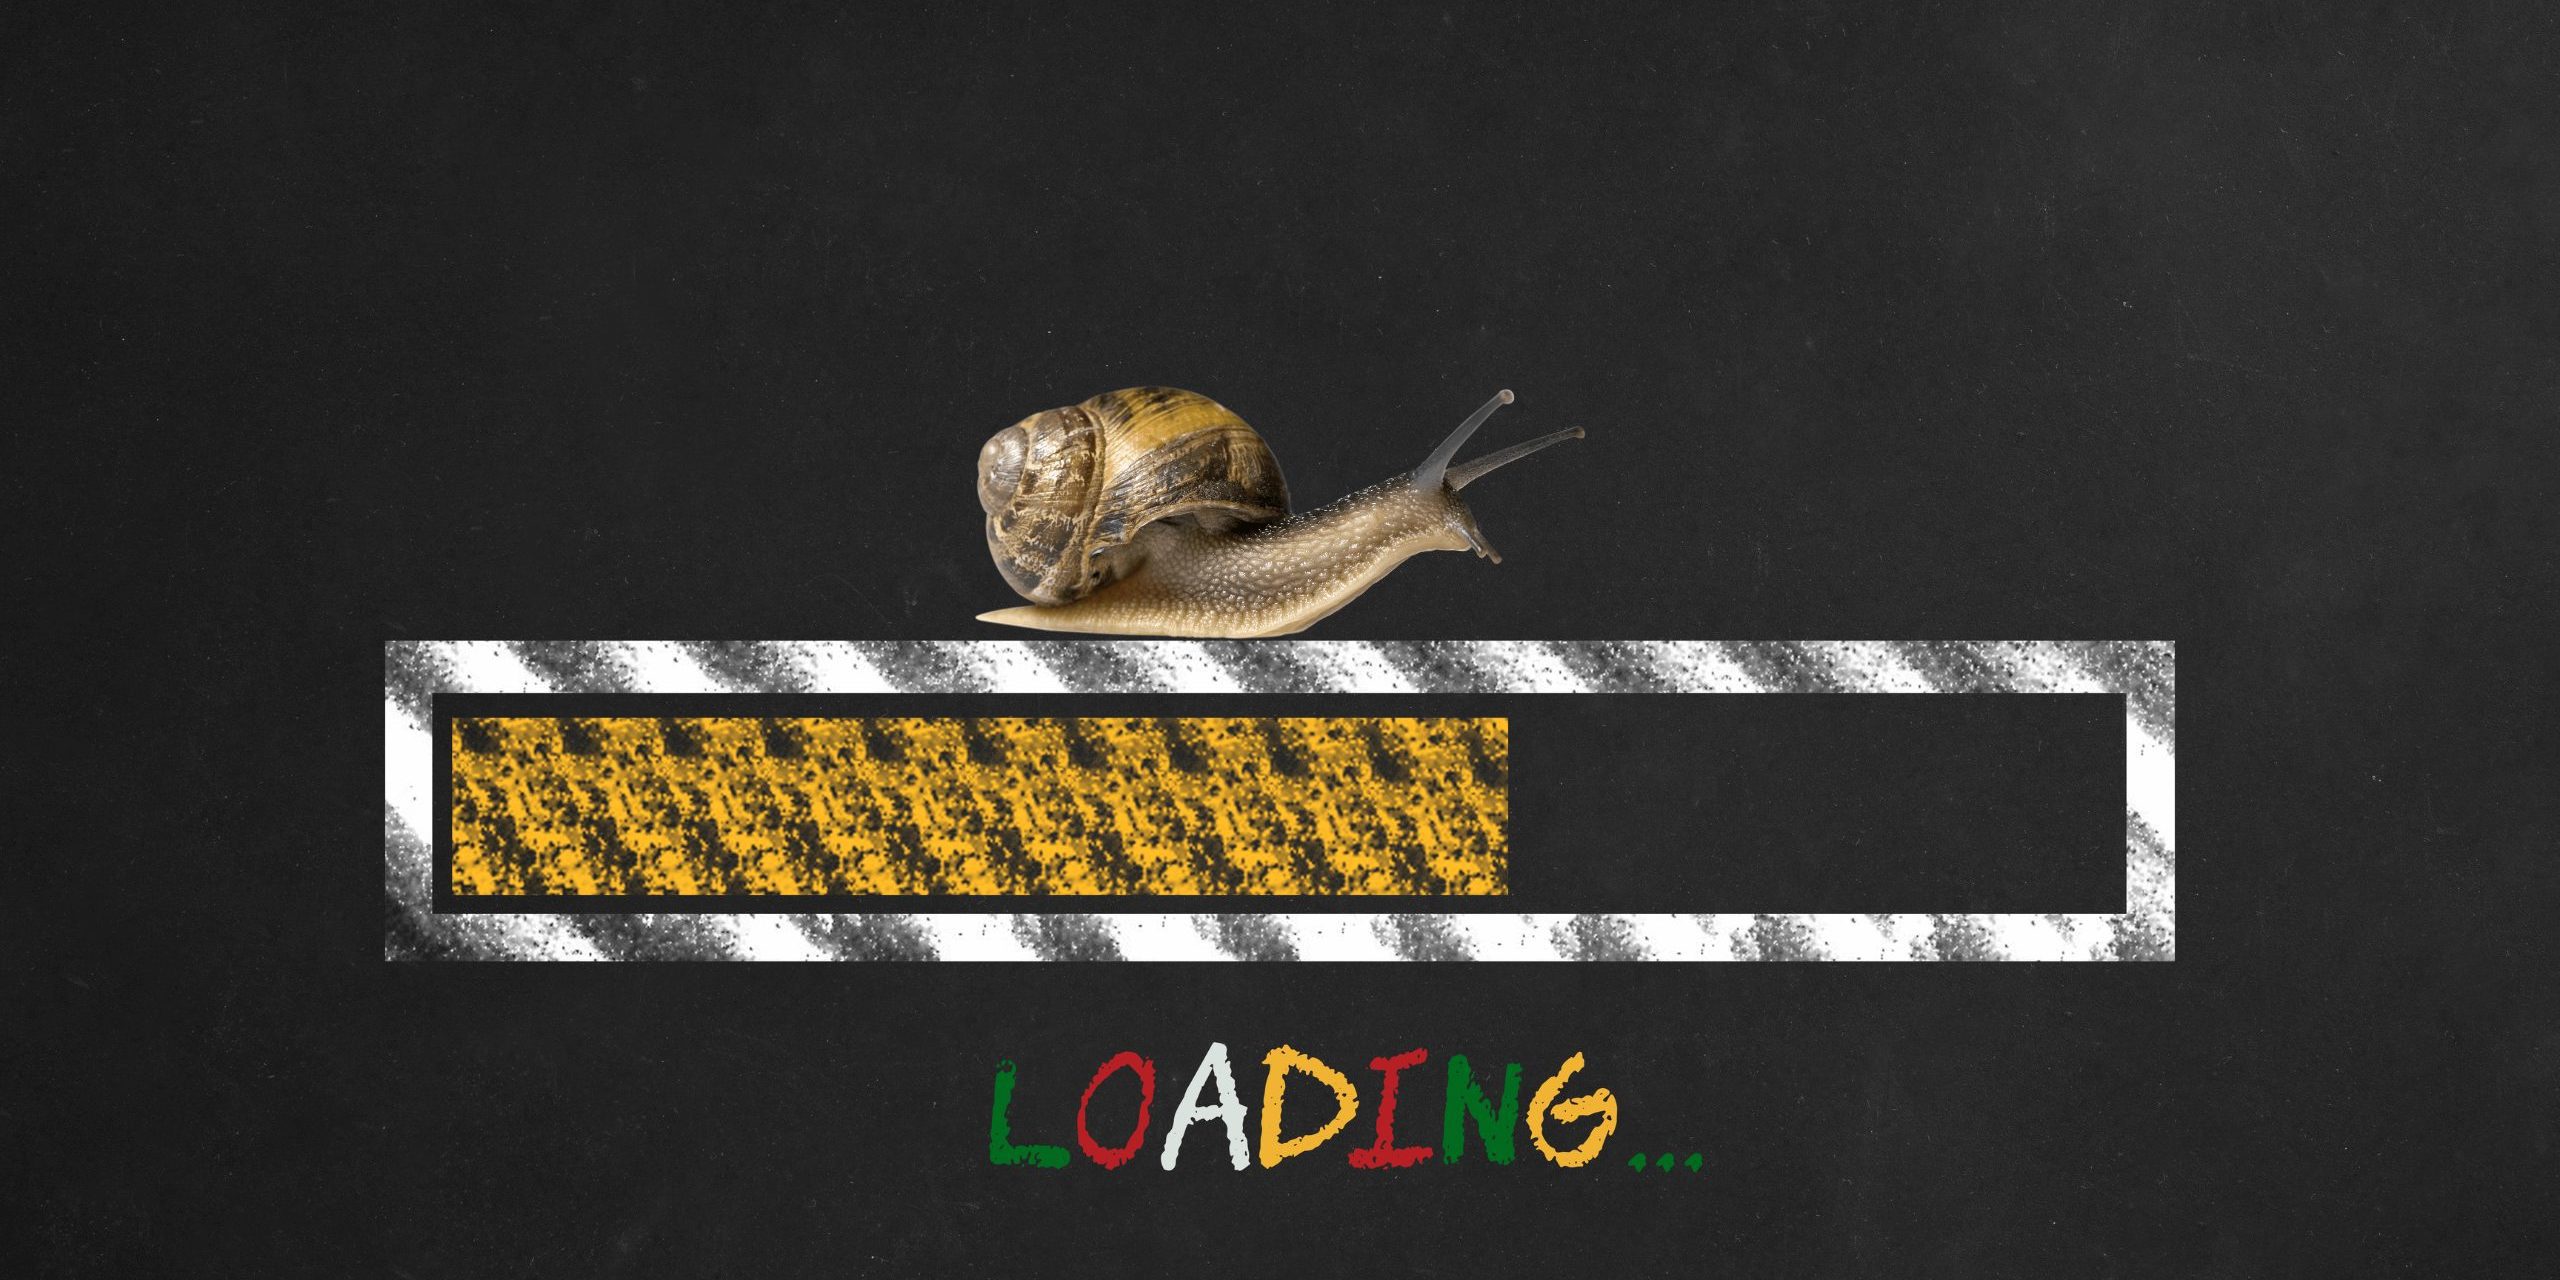 Website speed slow loading time impacting user experience